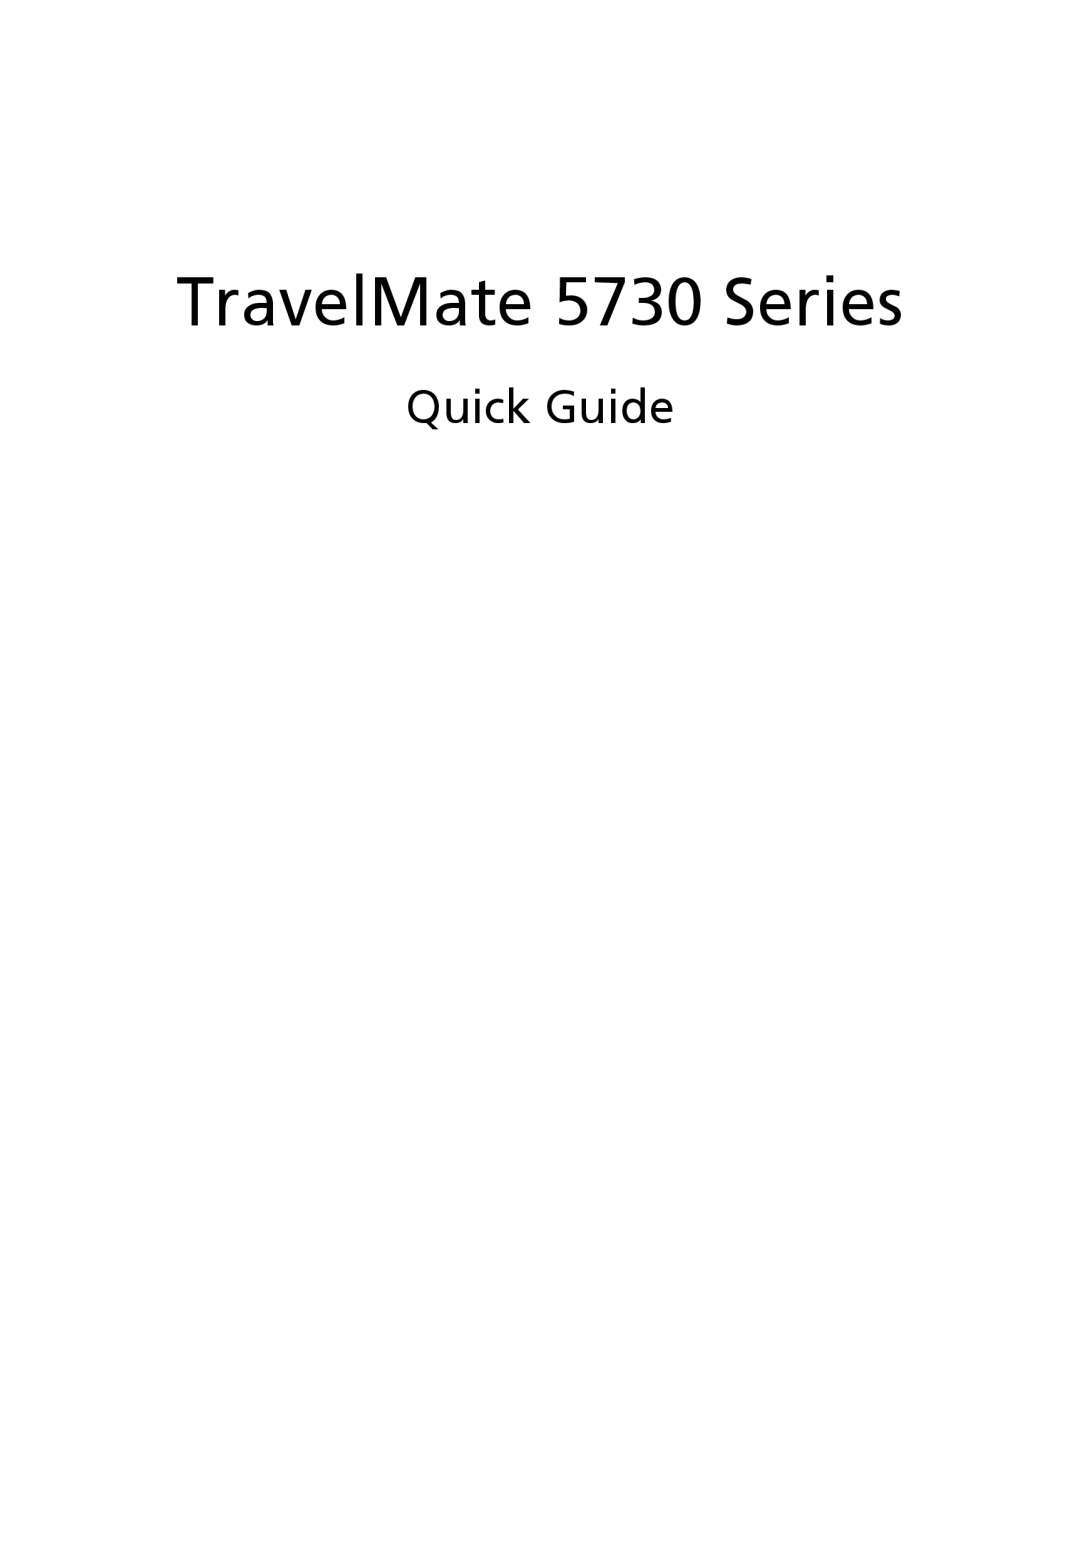 Acer 5630 Series, 5725 manual Quick Guide, TravelMate 5730 Series 